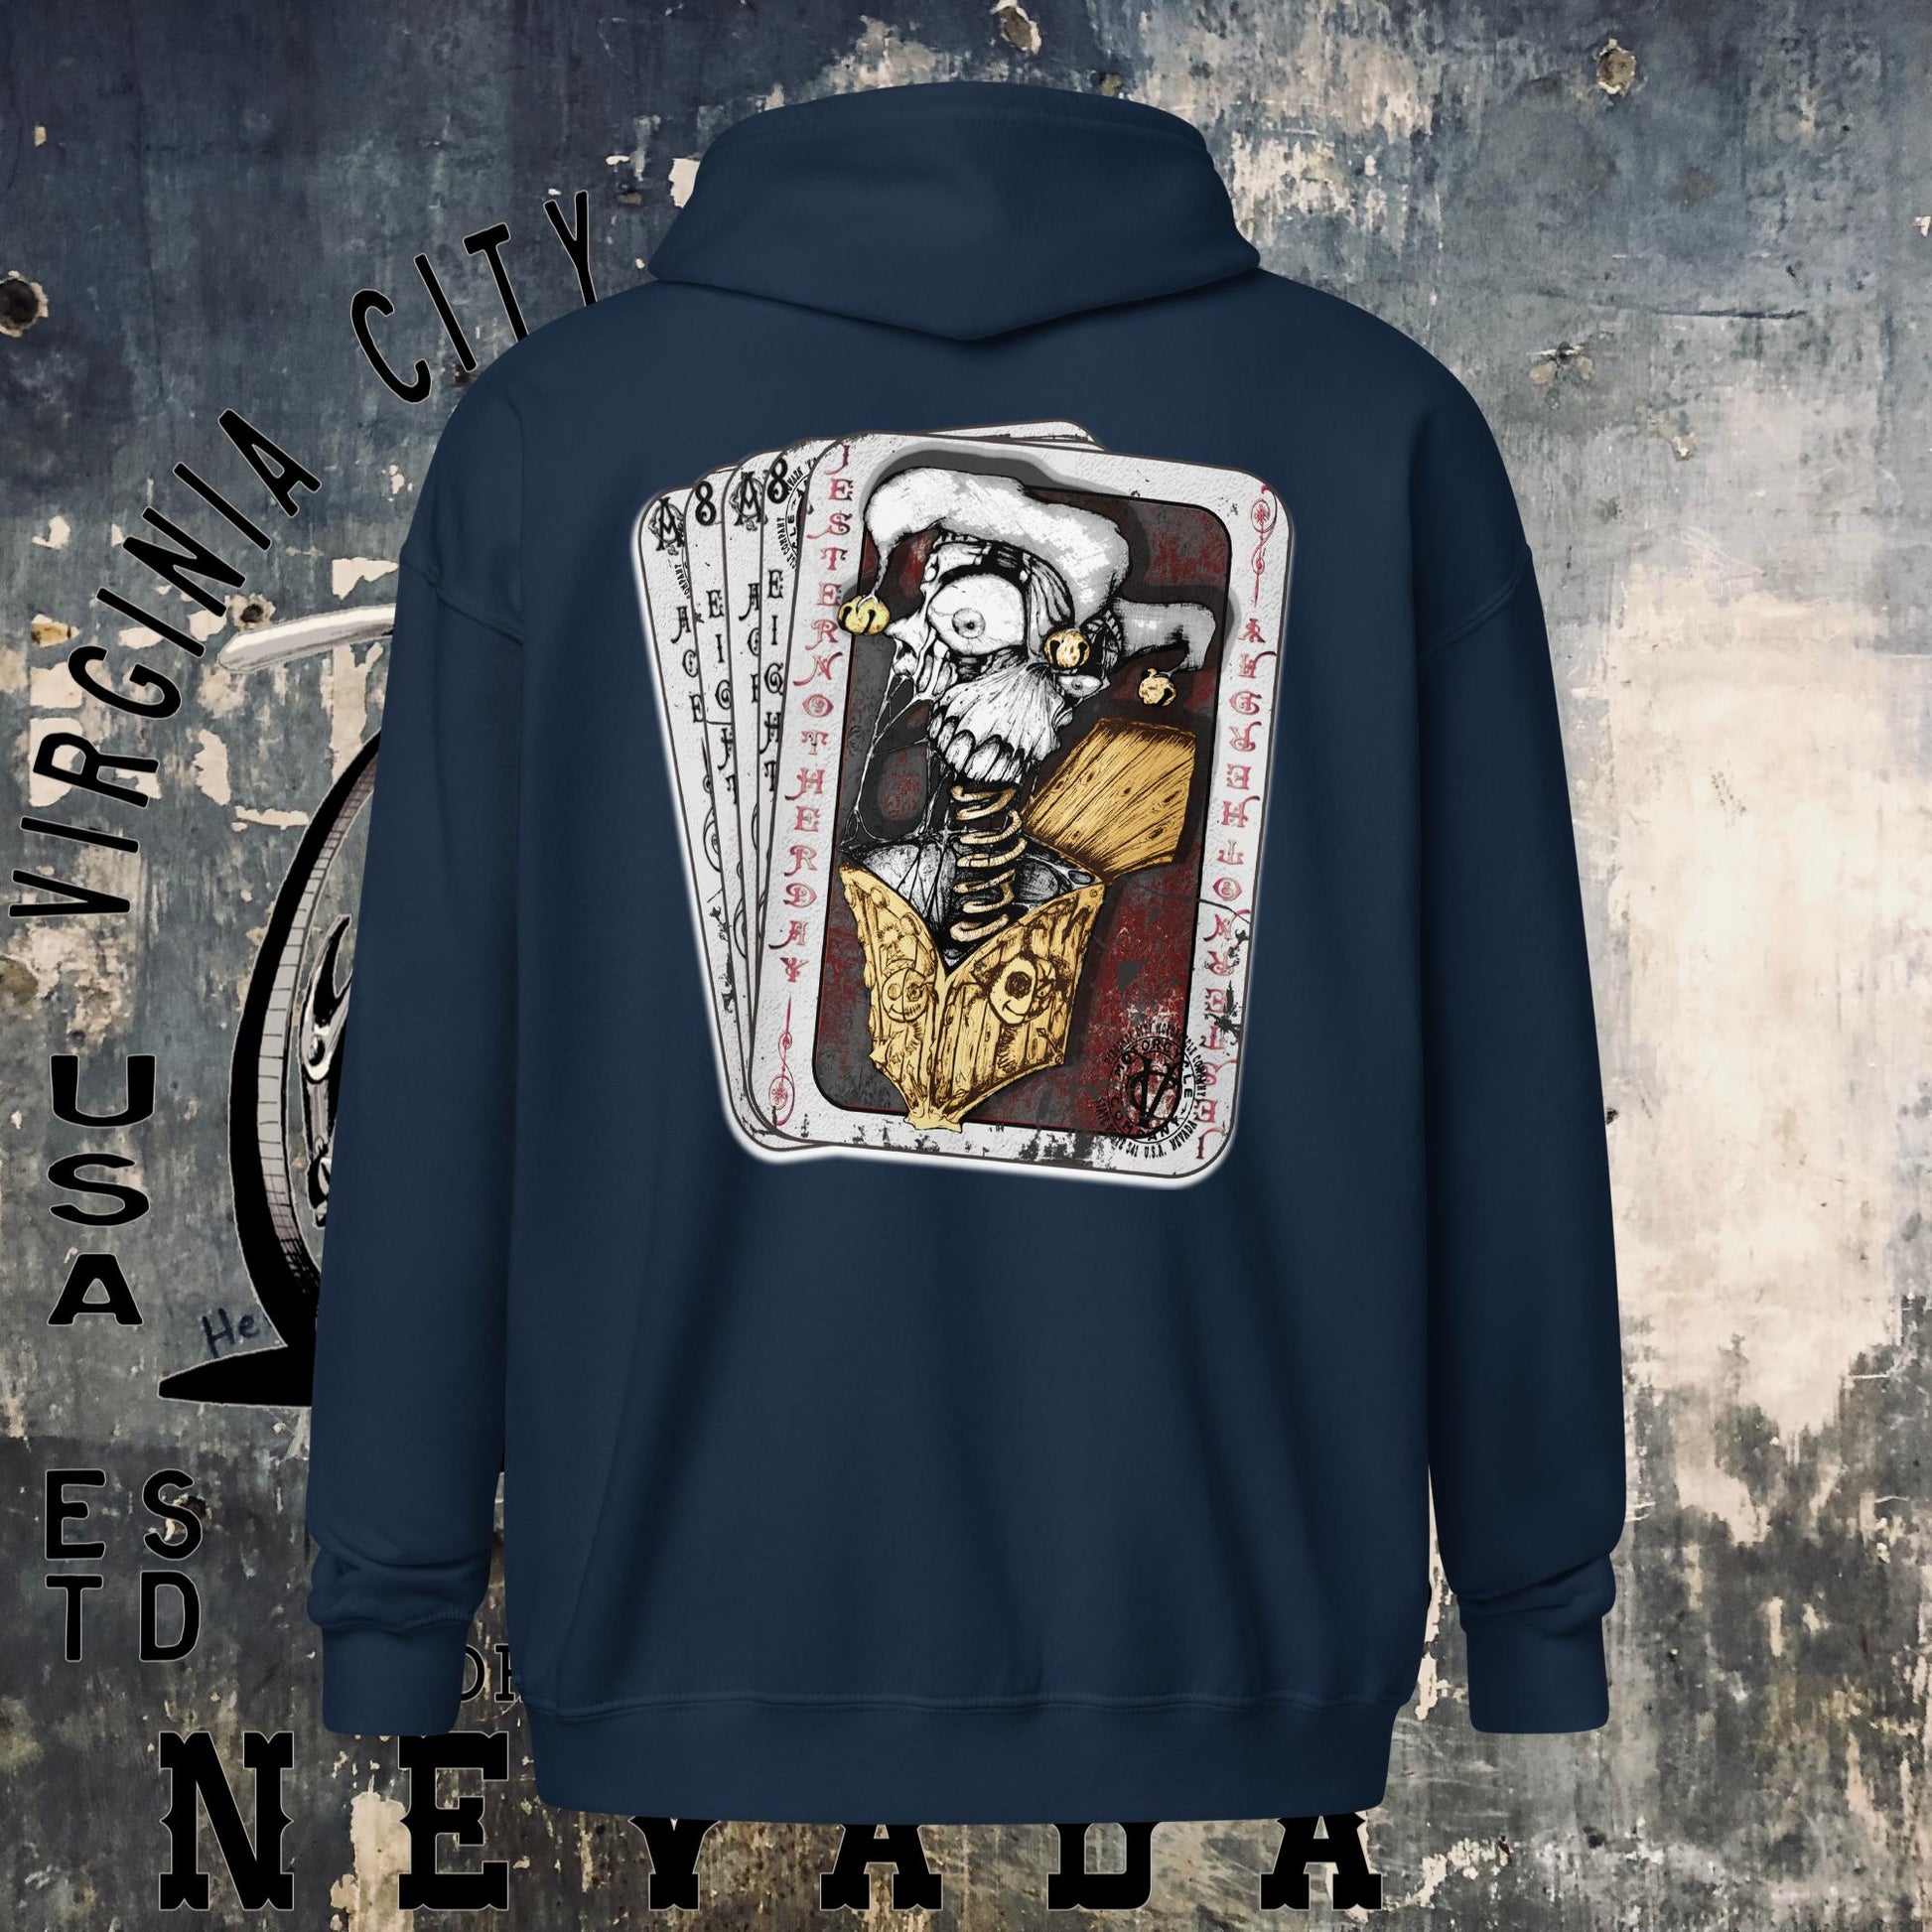 Jester'nother day Heavy blend zip hoodie Hoodie Virginia City Motorcycle Company Apparel in Nevada USA